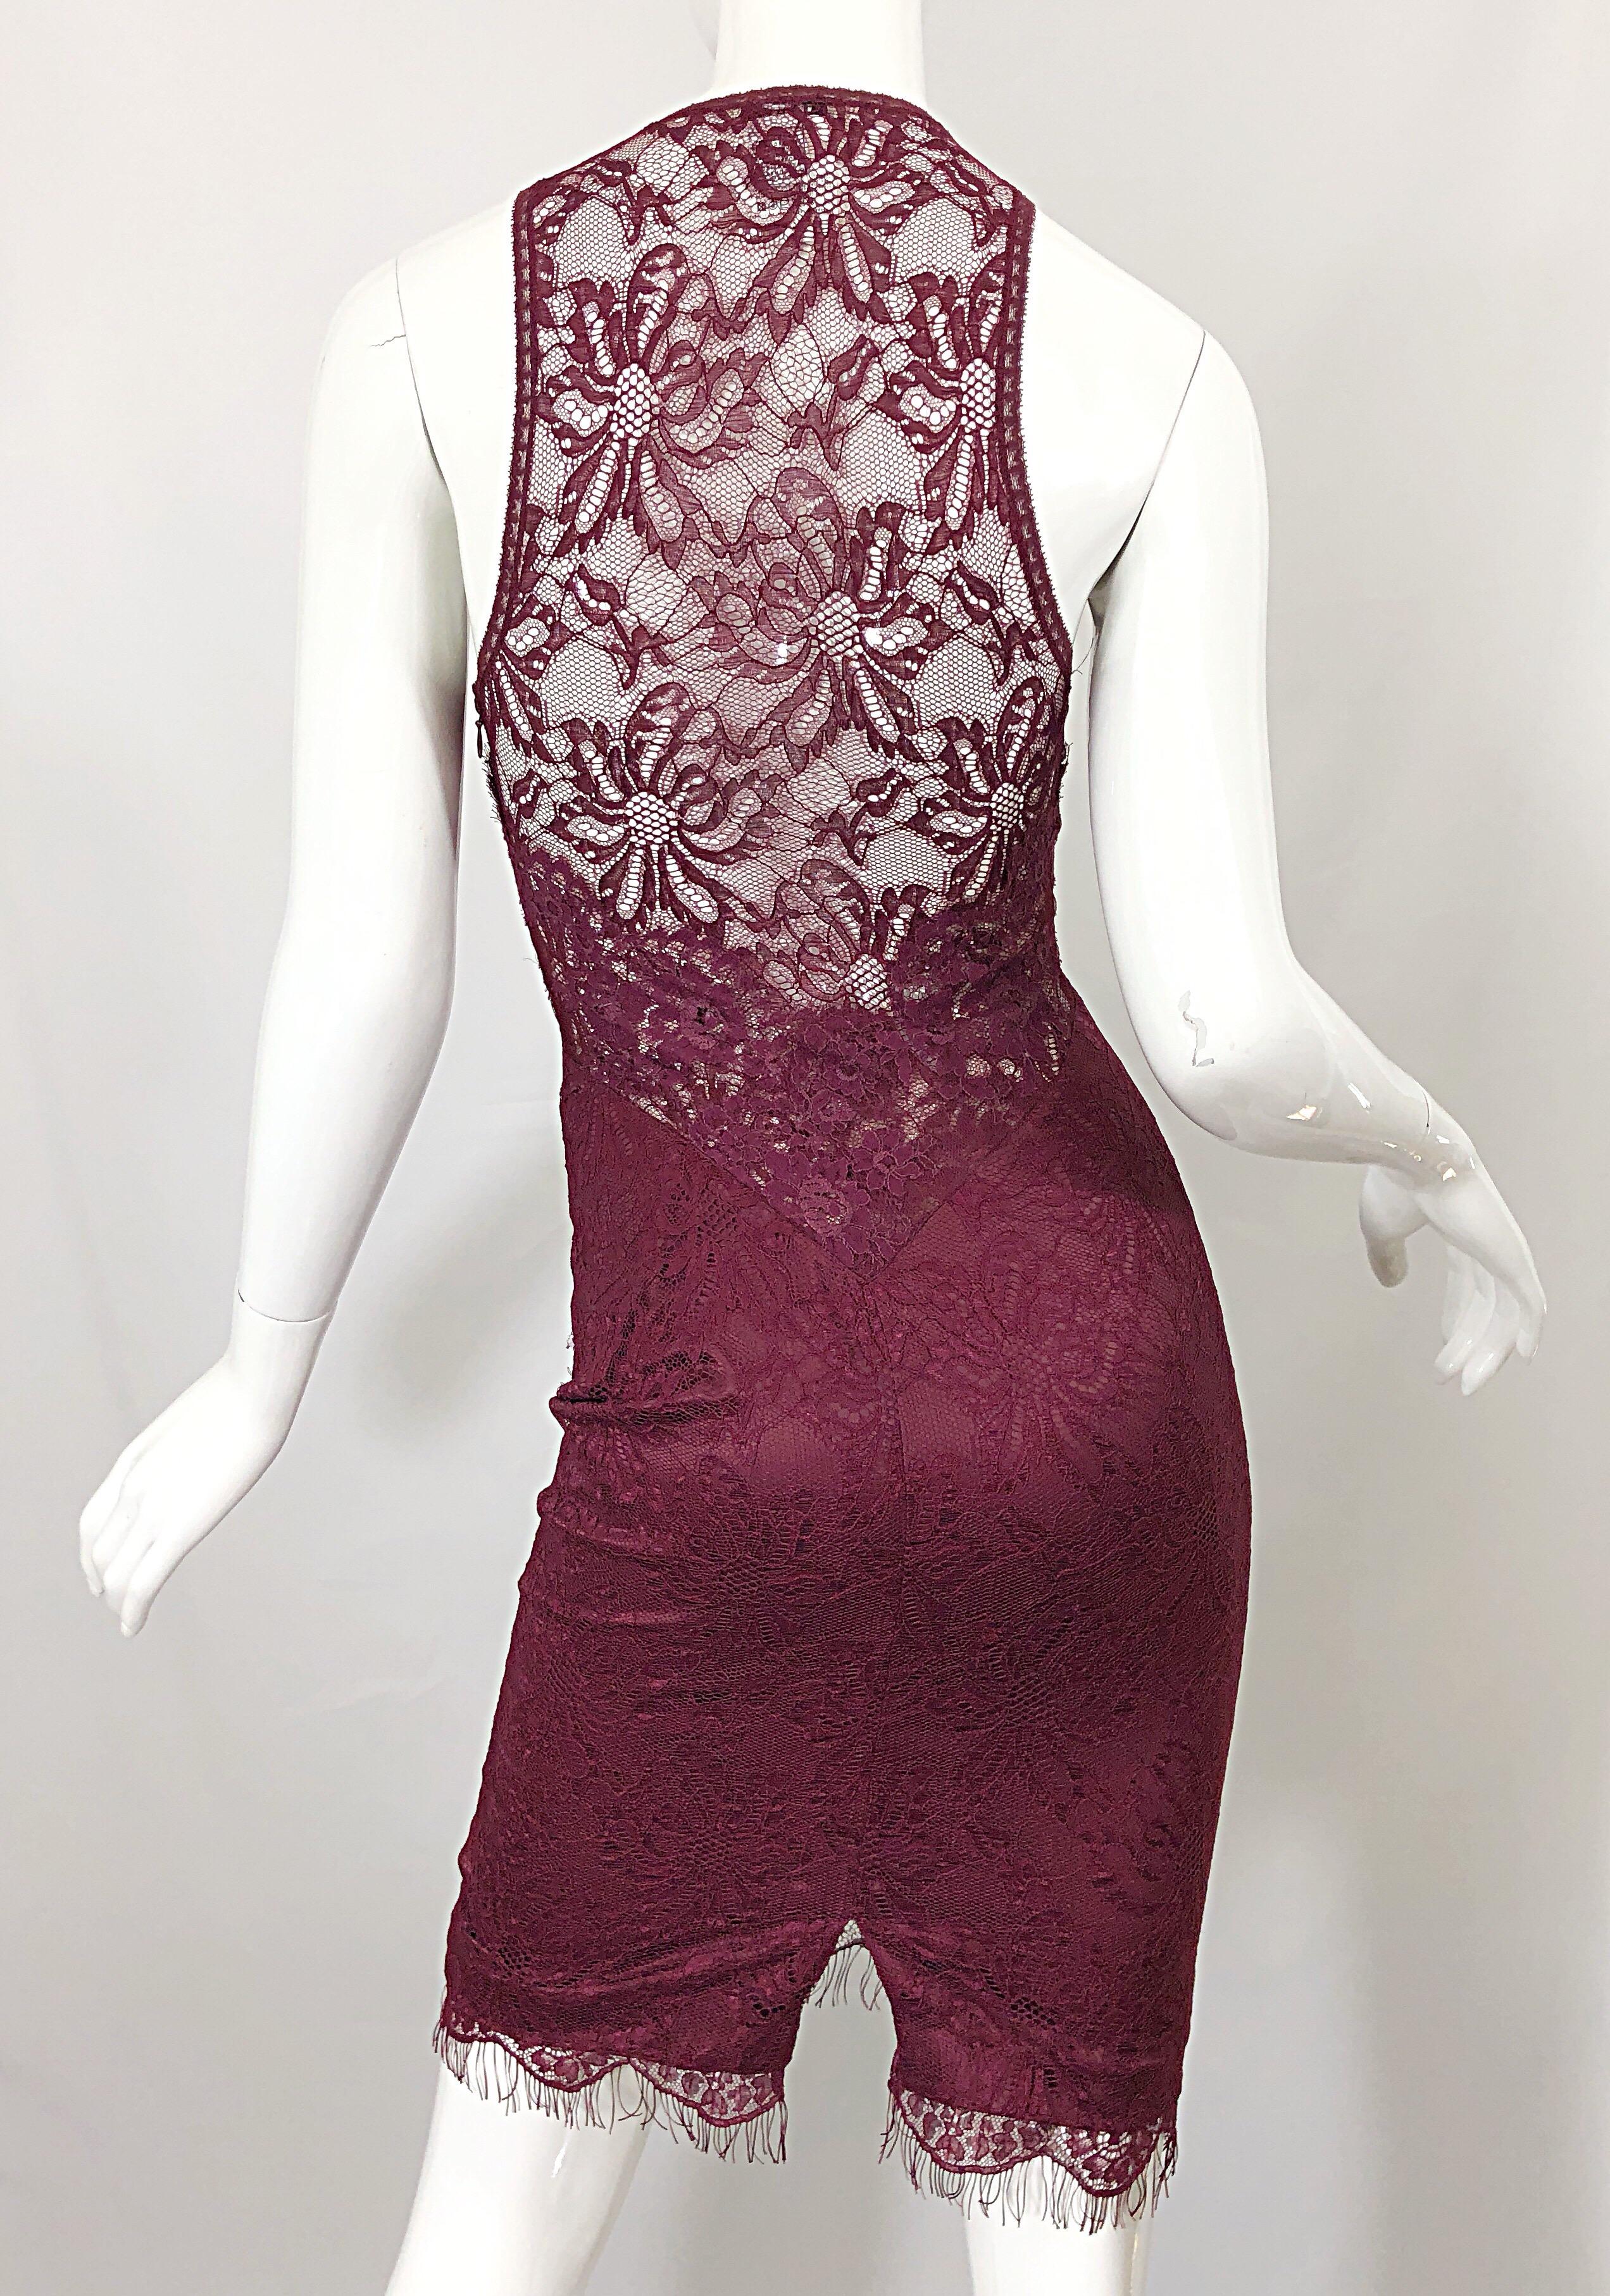 Dolce & Gabbana 1990s Burgundy Merlot Sexy Lace Bodycon Cut Out Vintage Dress 38 For Sale 5